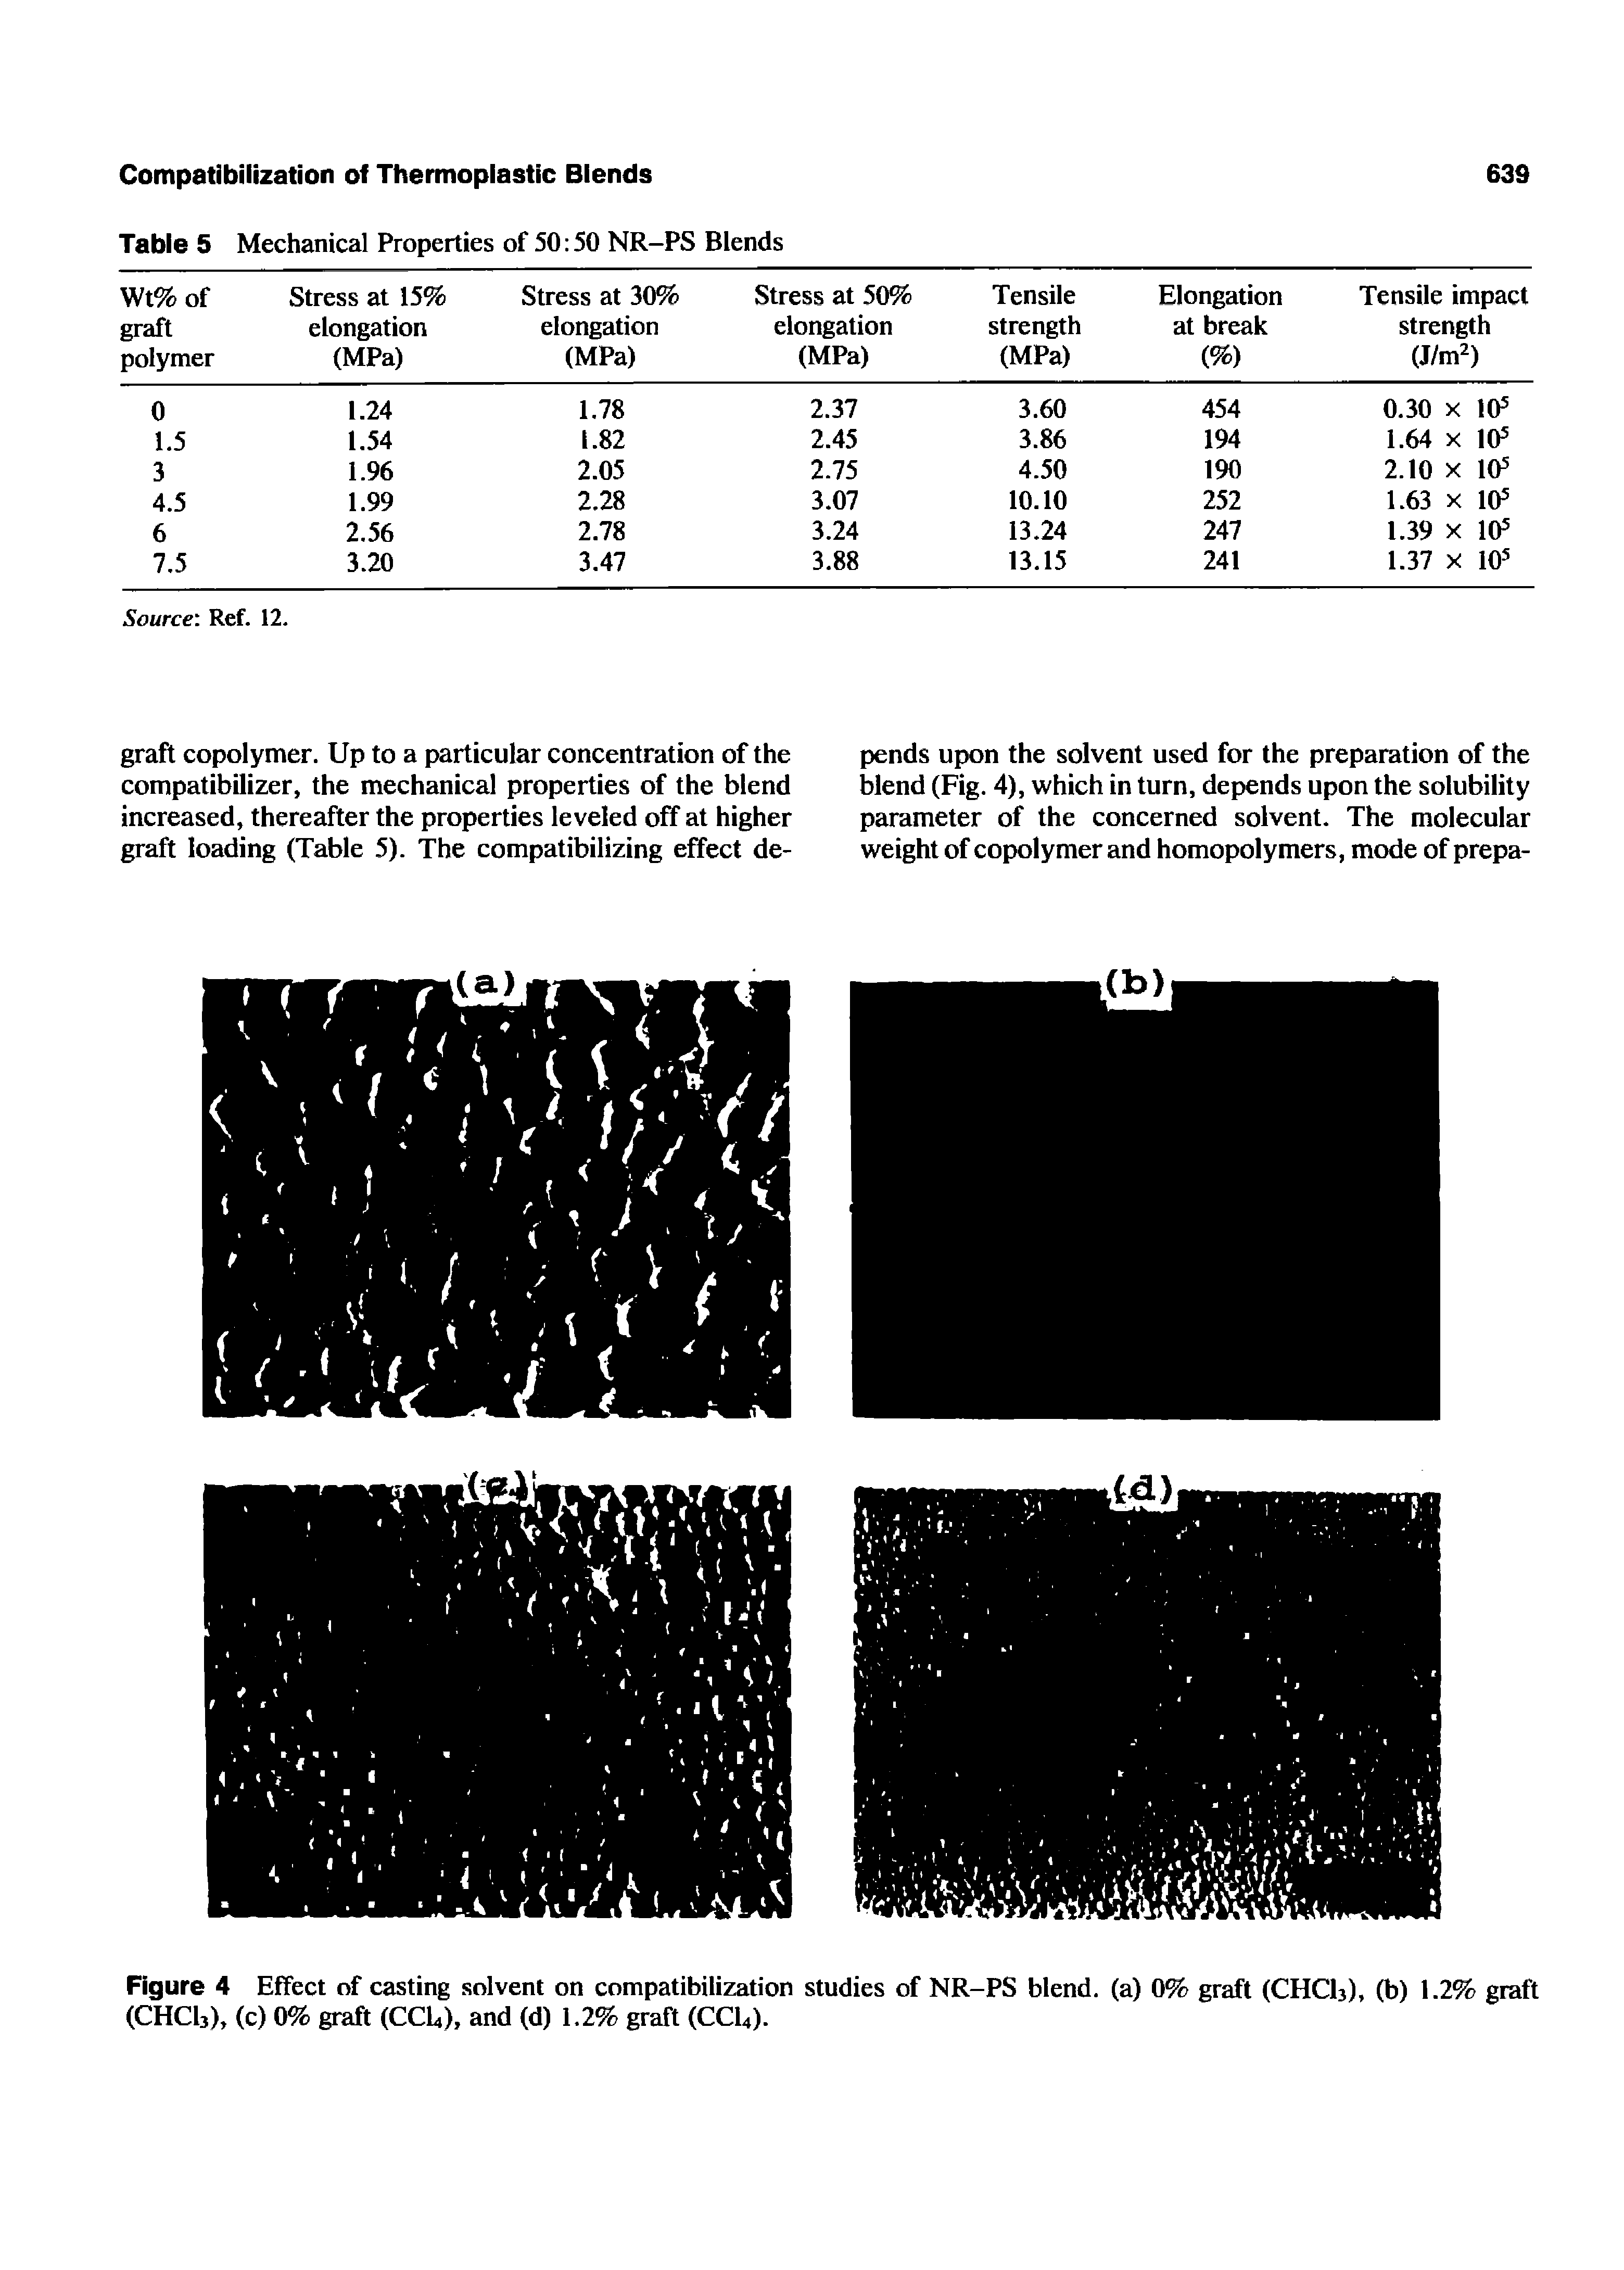 Figure 4 Elffect of casting solvent on compatibilization studies of NR-PS blend, (a) 0% graft (CHCI3), (b) 1.2% graft (CHCI3), (c) 0% graft (CCI4), and (d) 1.2% graft (CCI4).